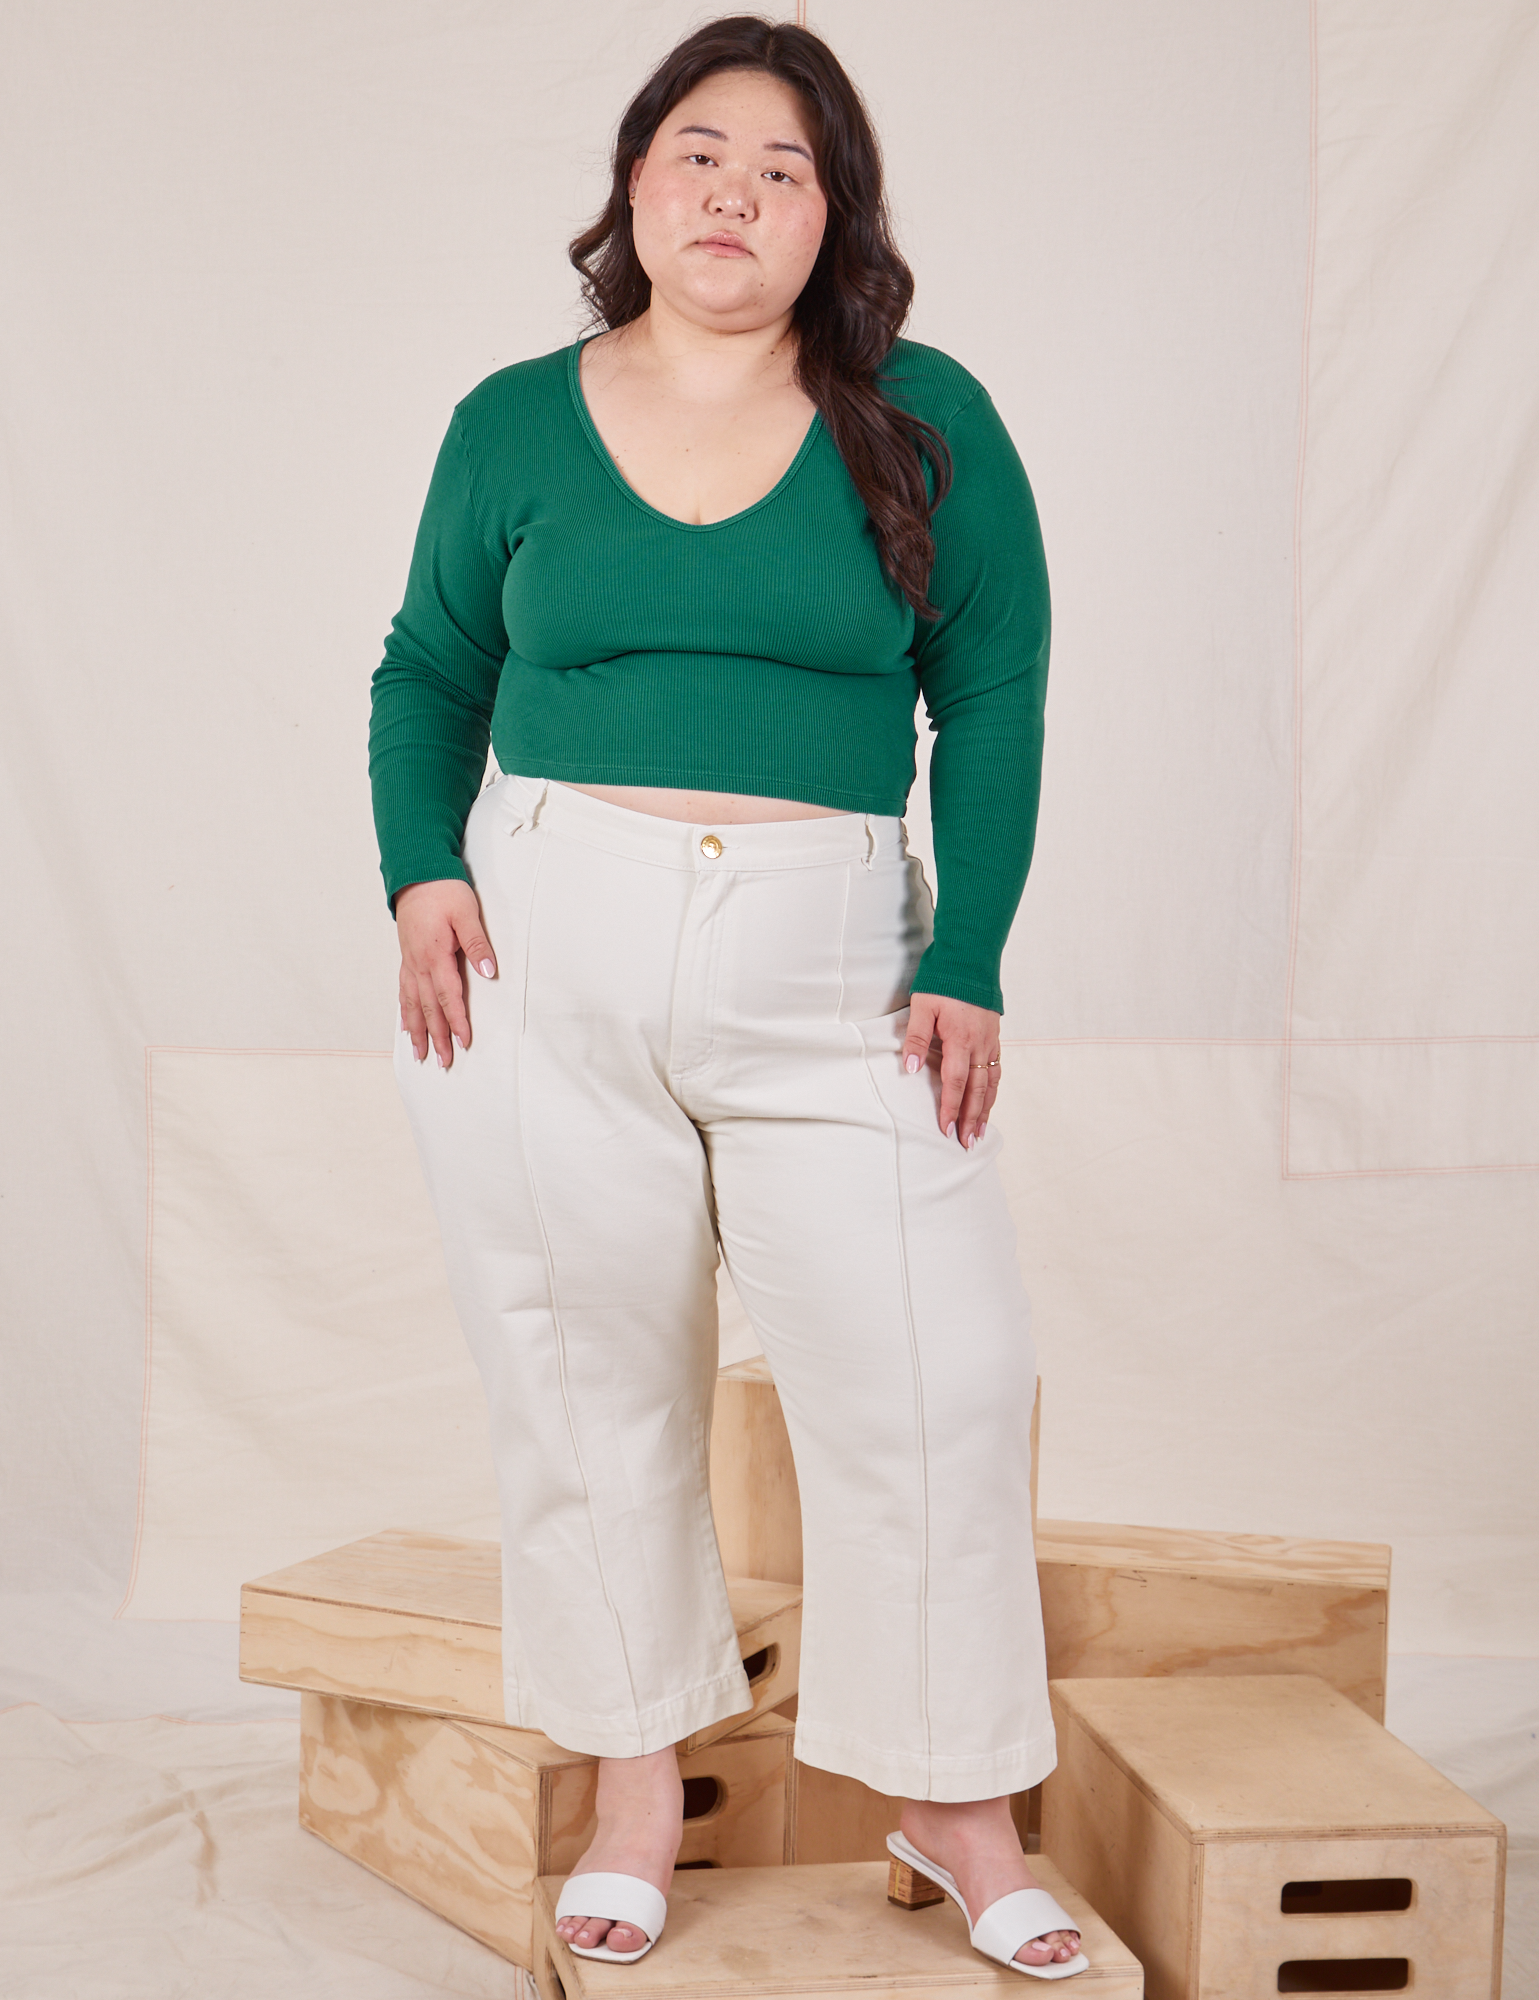 Ashley is wearing Long Sleeve V-Neck Tee in Hunter Green and vintage off-white Petite Western Pants